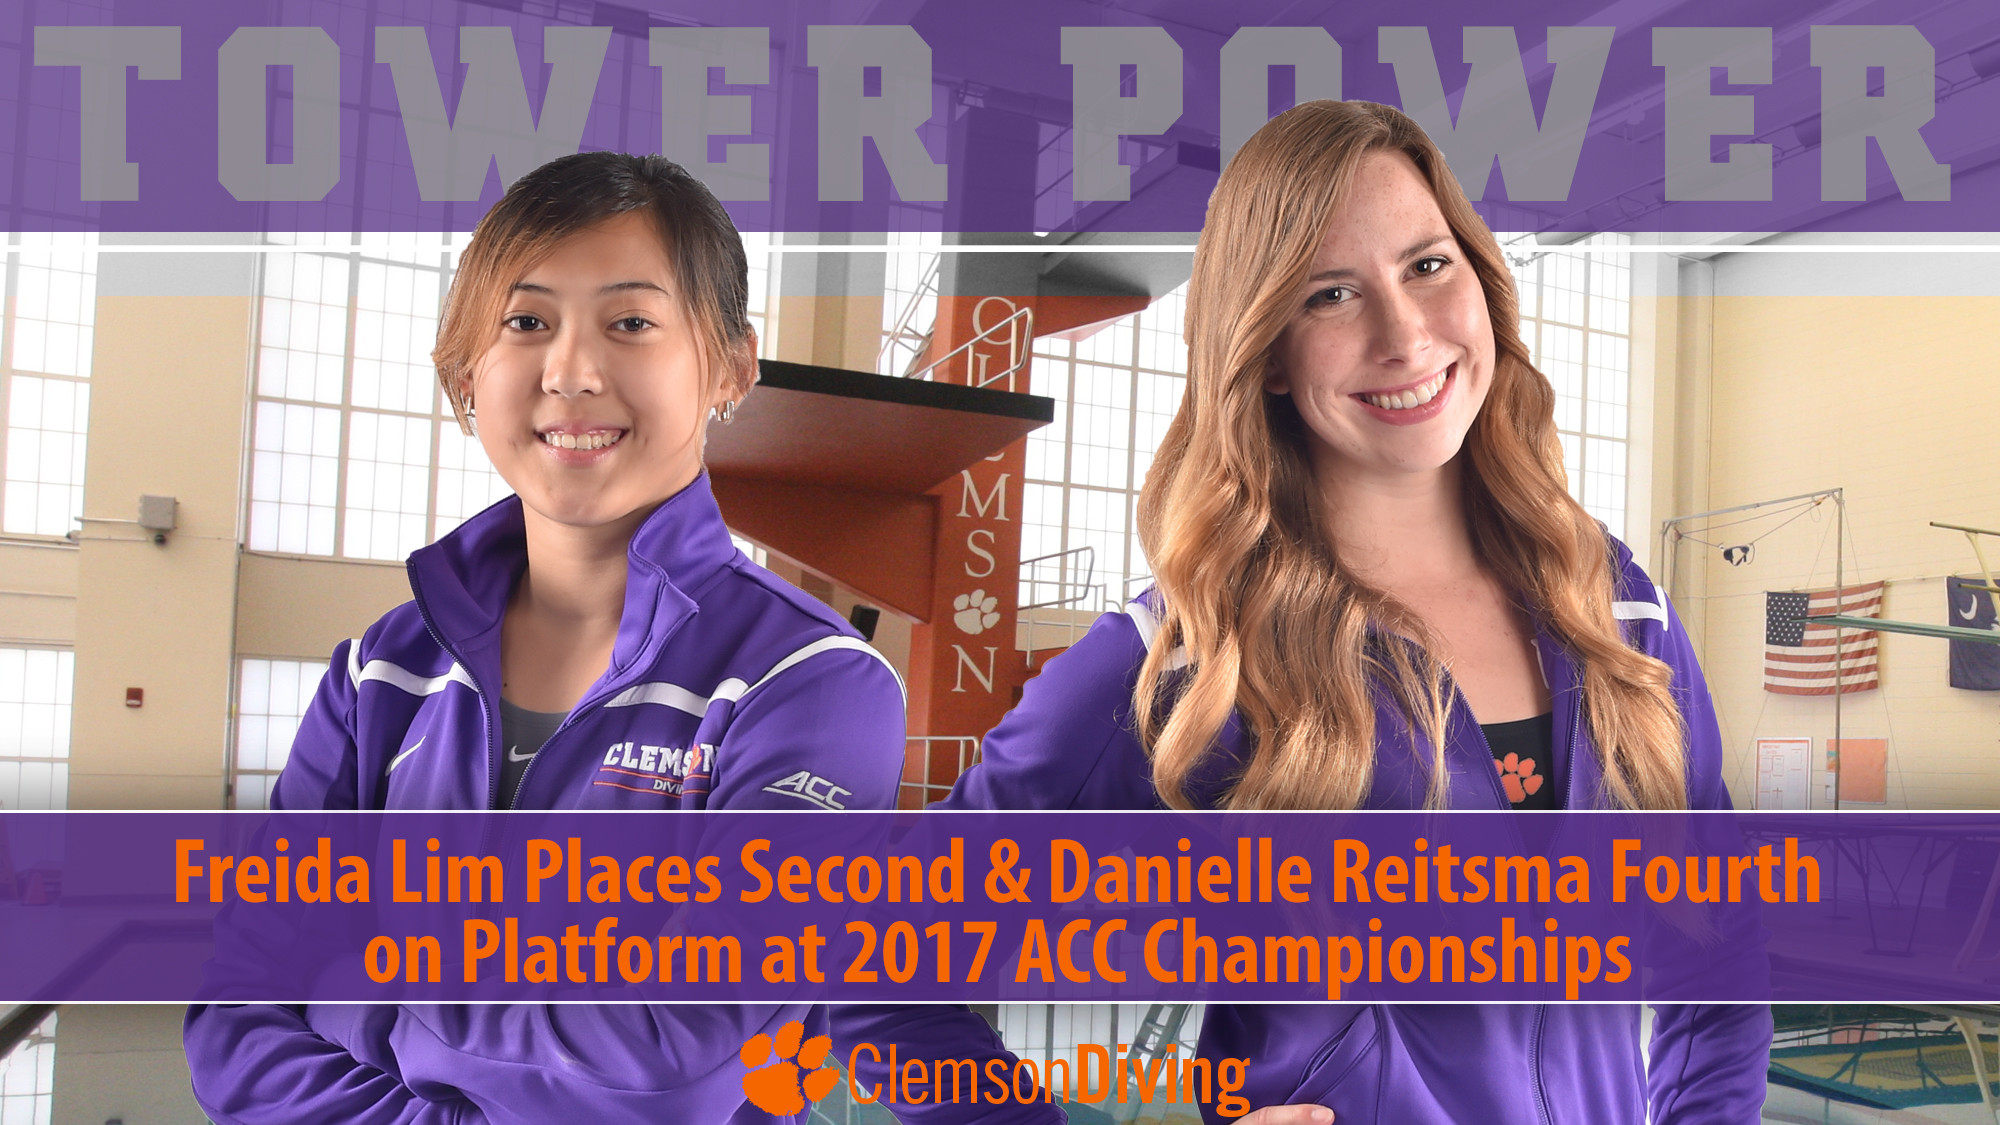 Lim & Reitsma Make Clemson History, Place 2nd & 4th in Platform at ACC Championships